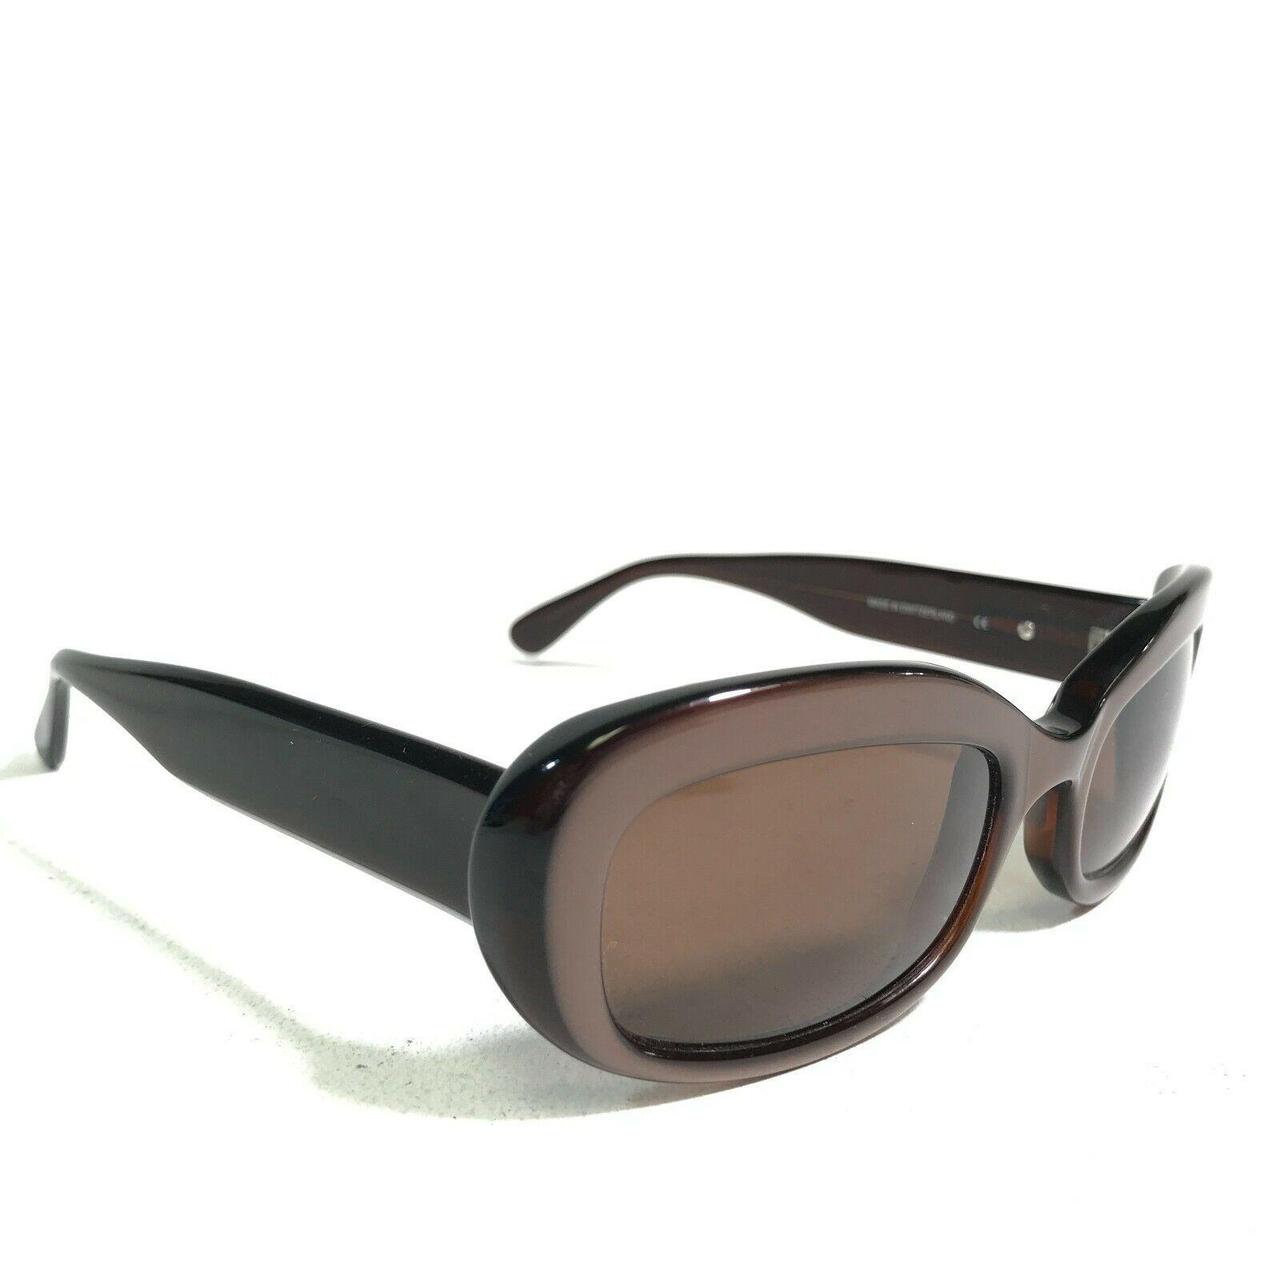 Product Image 2 - Chopard Sunglasses CH535 6062 Brown